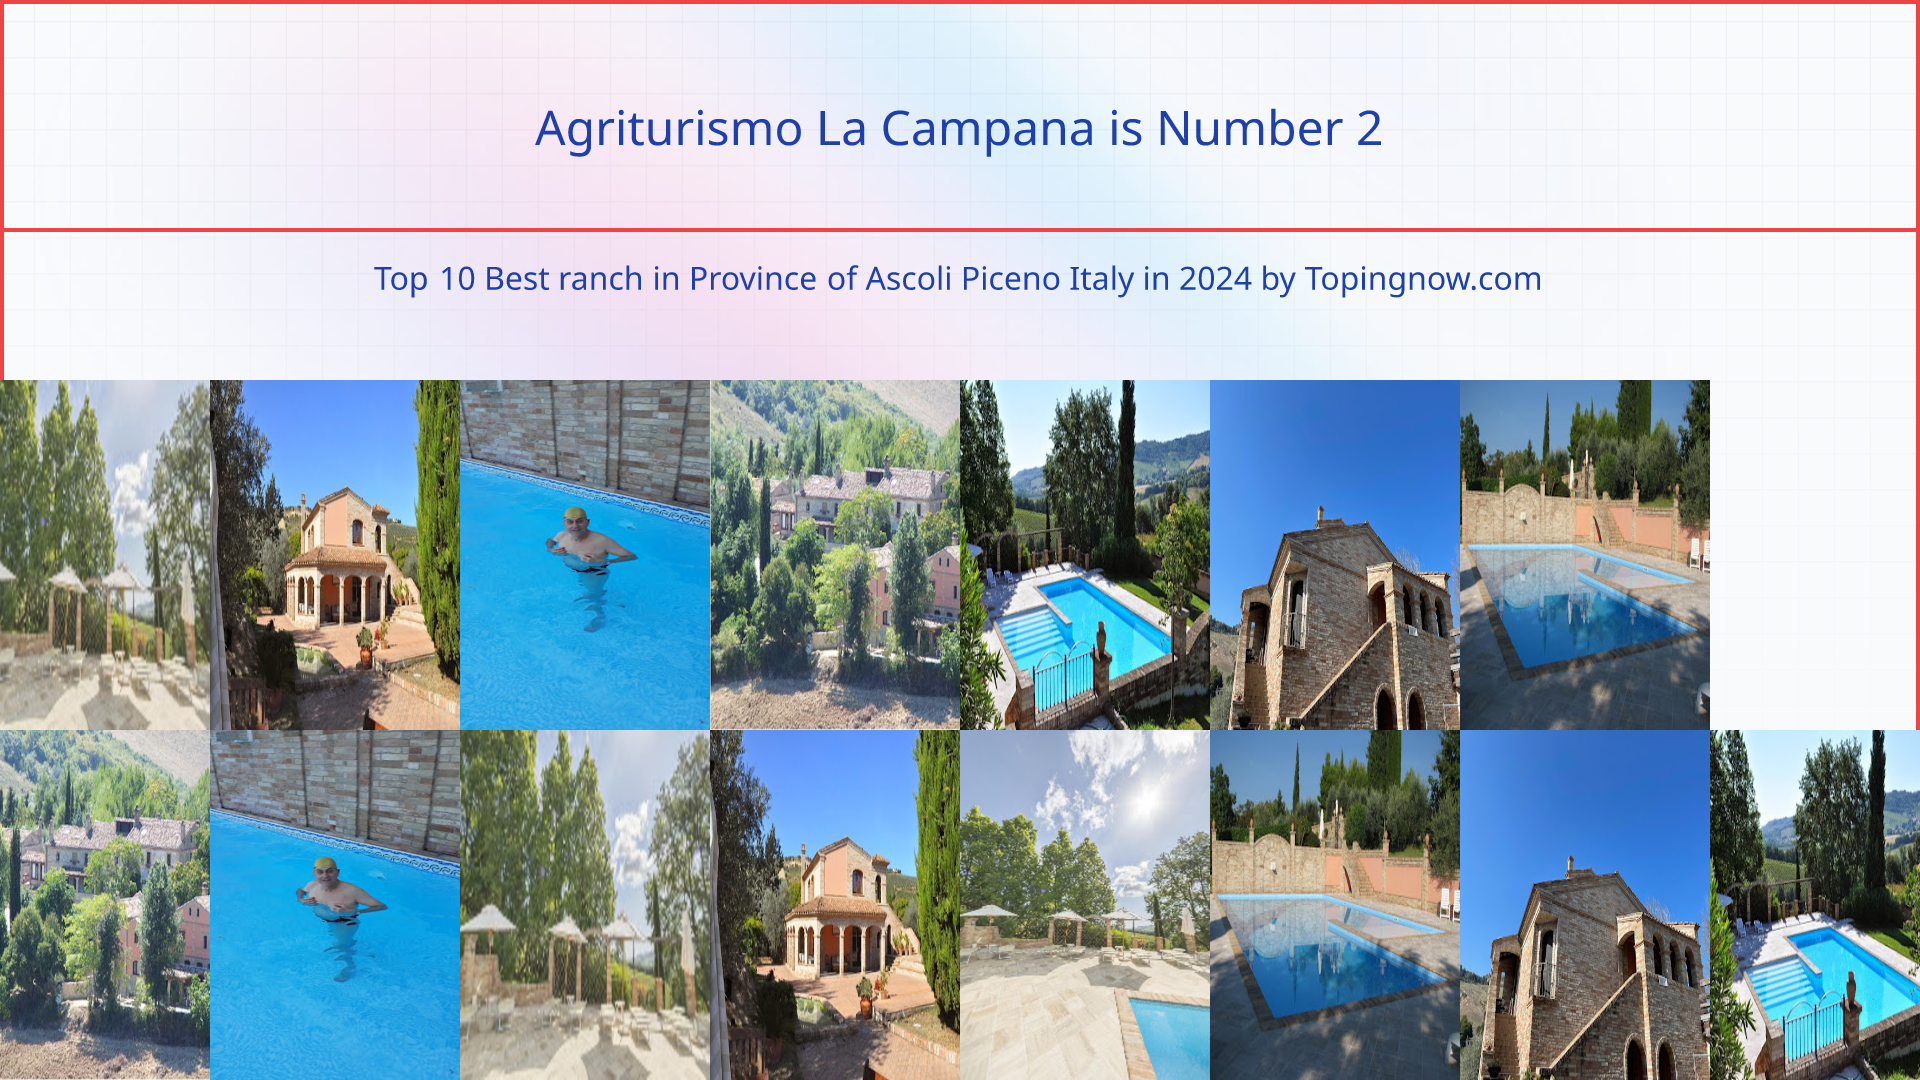 Agriturismo La Campana: Top 10 Best ranch in Province of Ascoli Piceno Italy in 2024